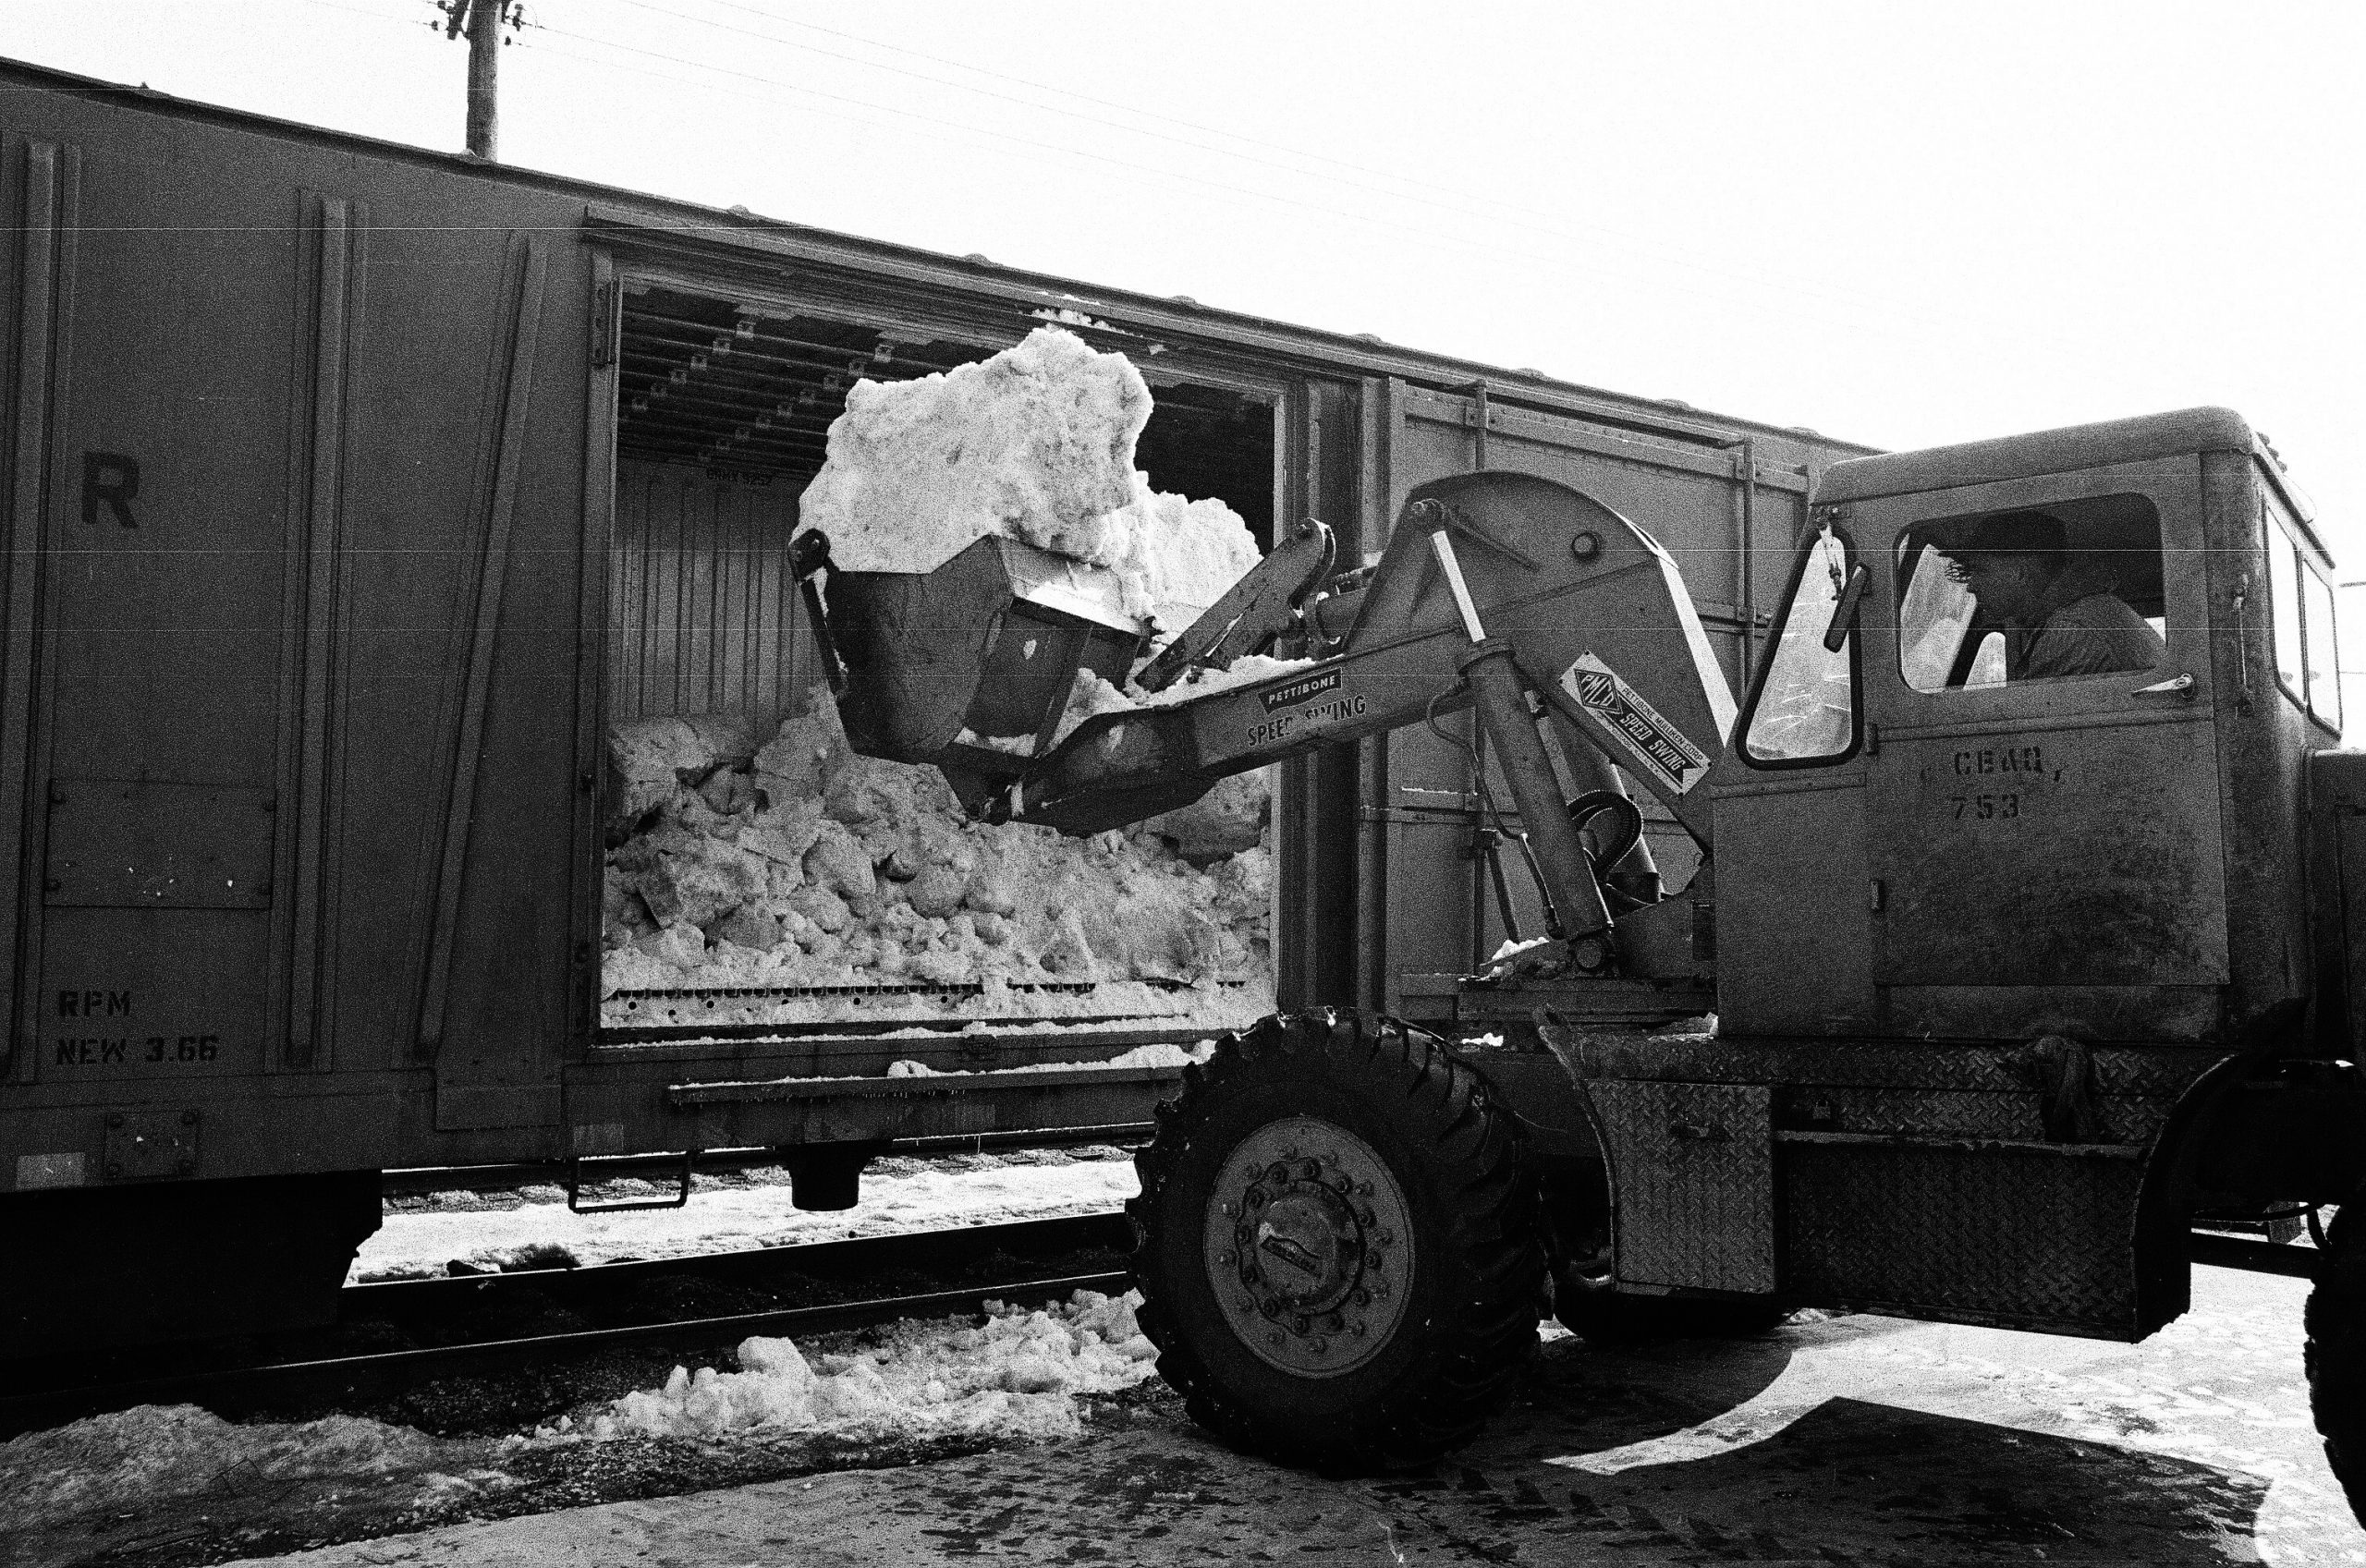 Snow being loaded into a refrigerated rail car by a bulldozer